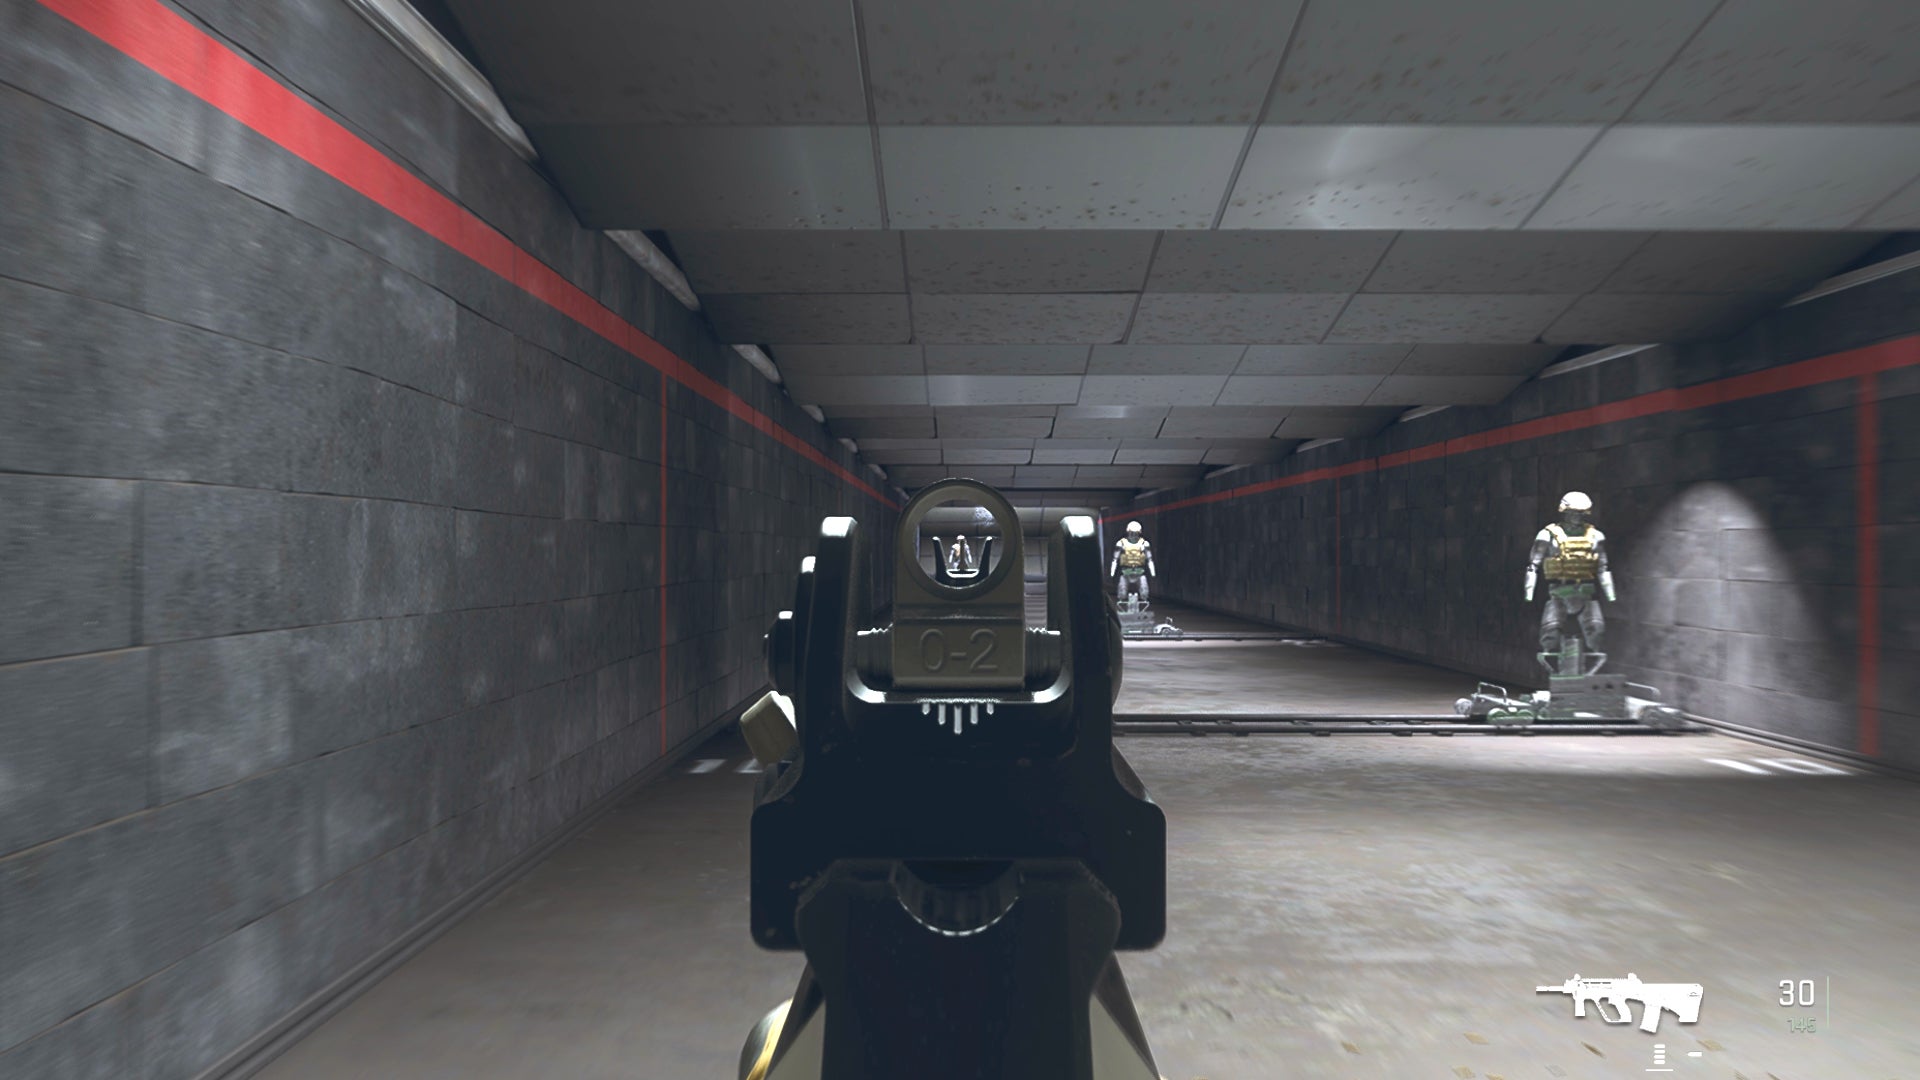 The player in Warzone 2.0 aims at a training dummy with the STB-556 ironsights.